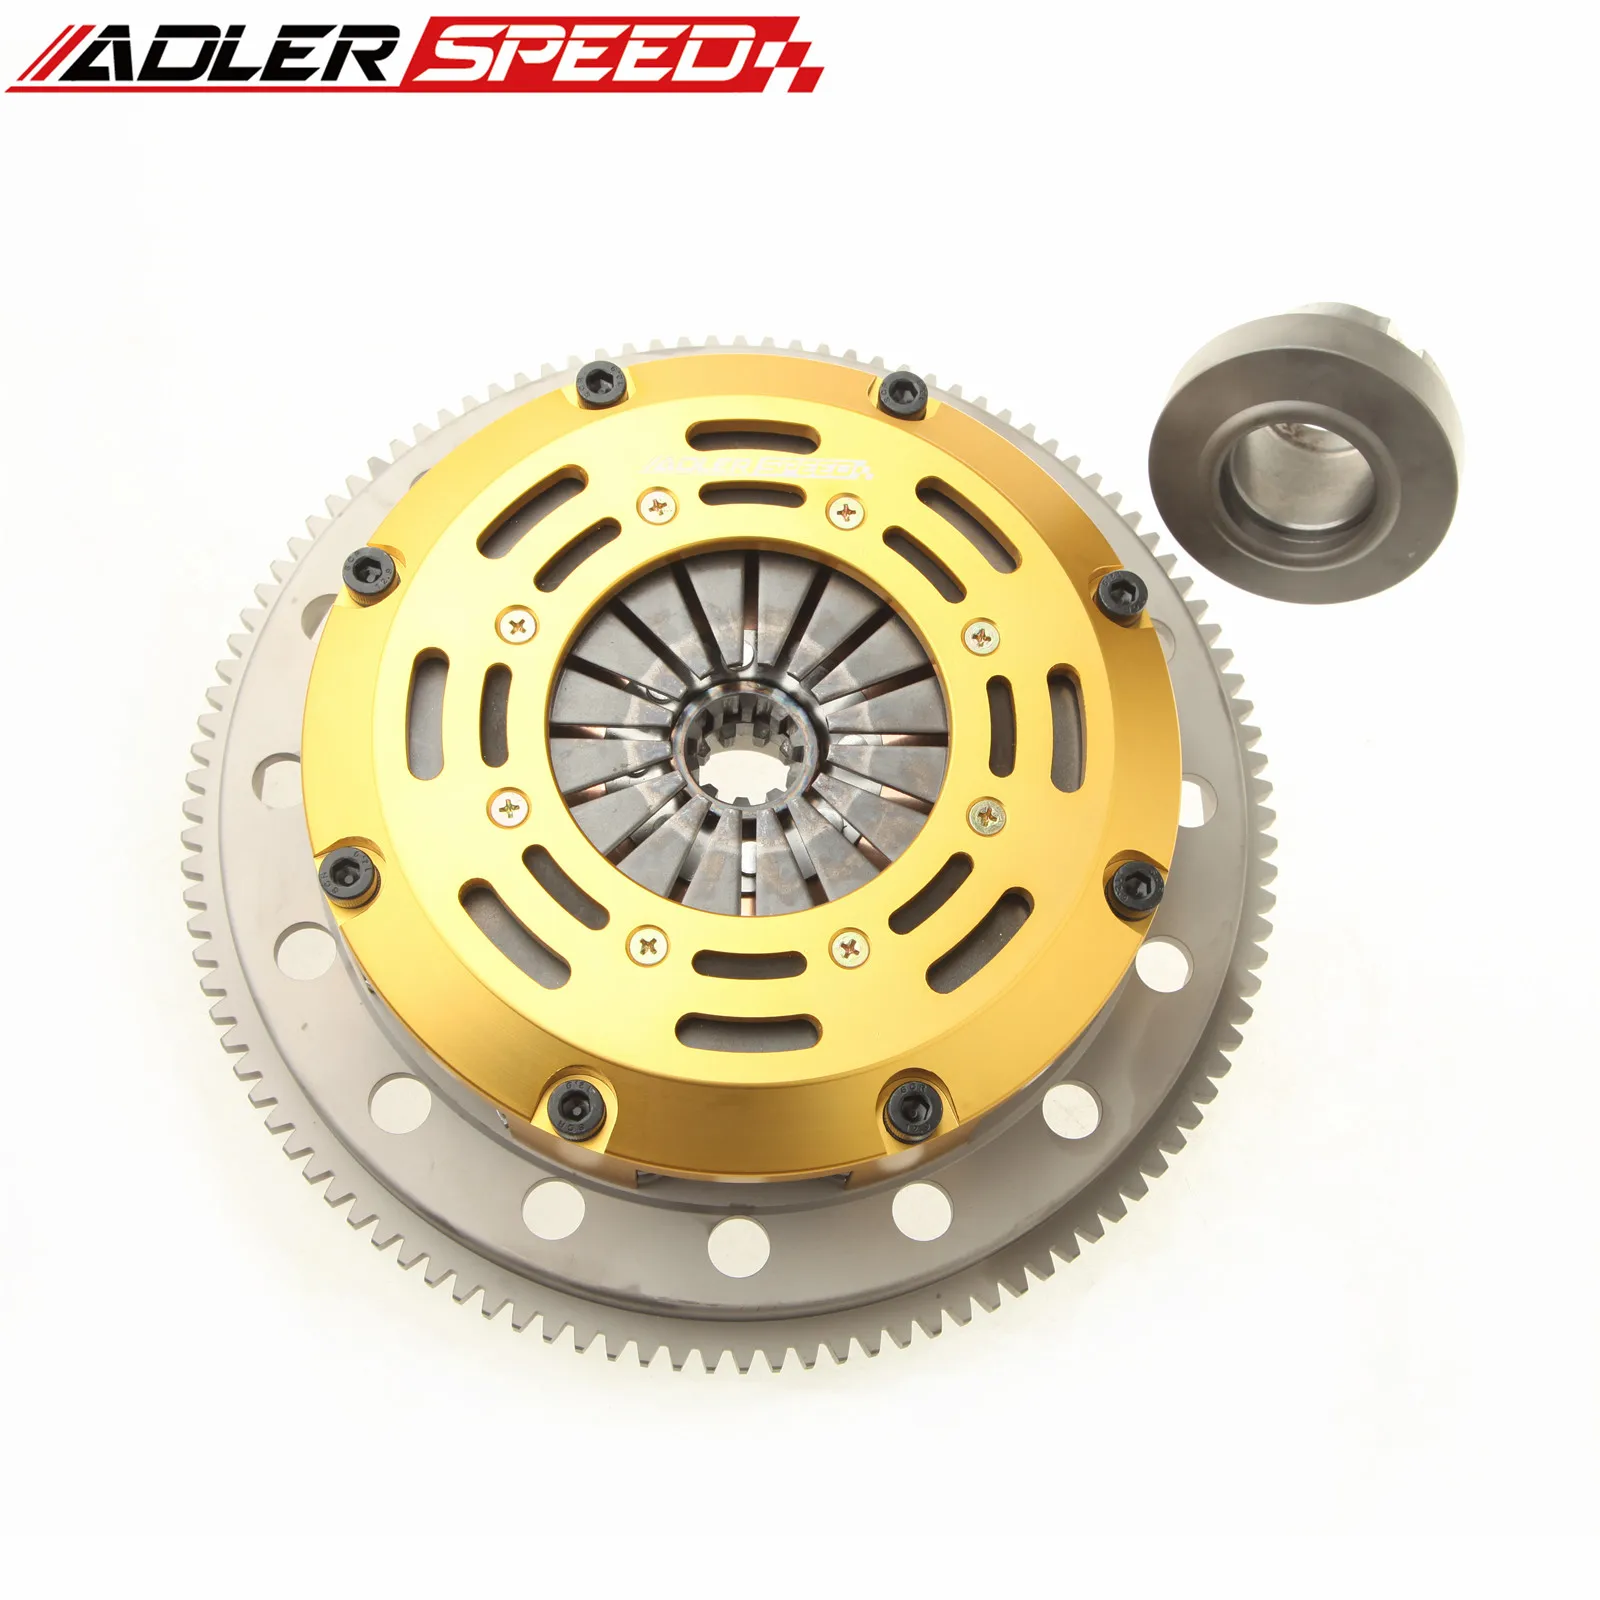 

ADLERSPEED RACING TWIN DISC CLUTCH KIT For 2001 - 2006 BMW M3 (3.2L DOHC 6cyl S54) 6-SPEED